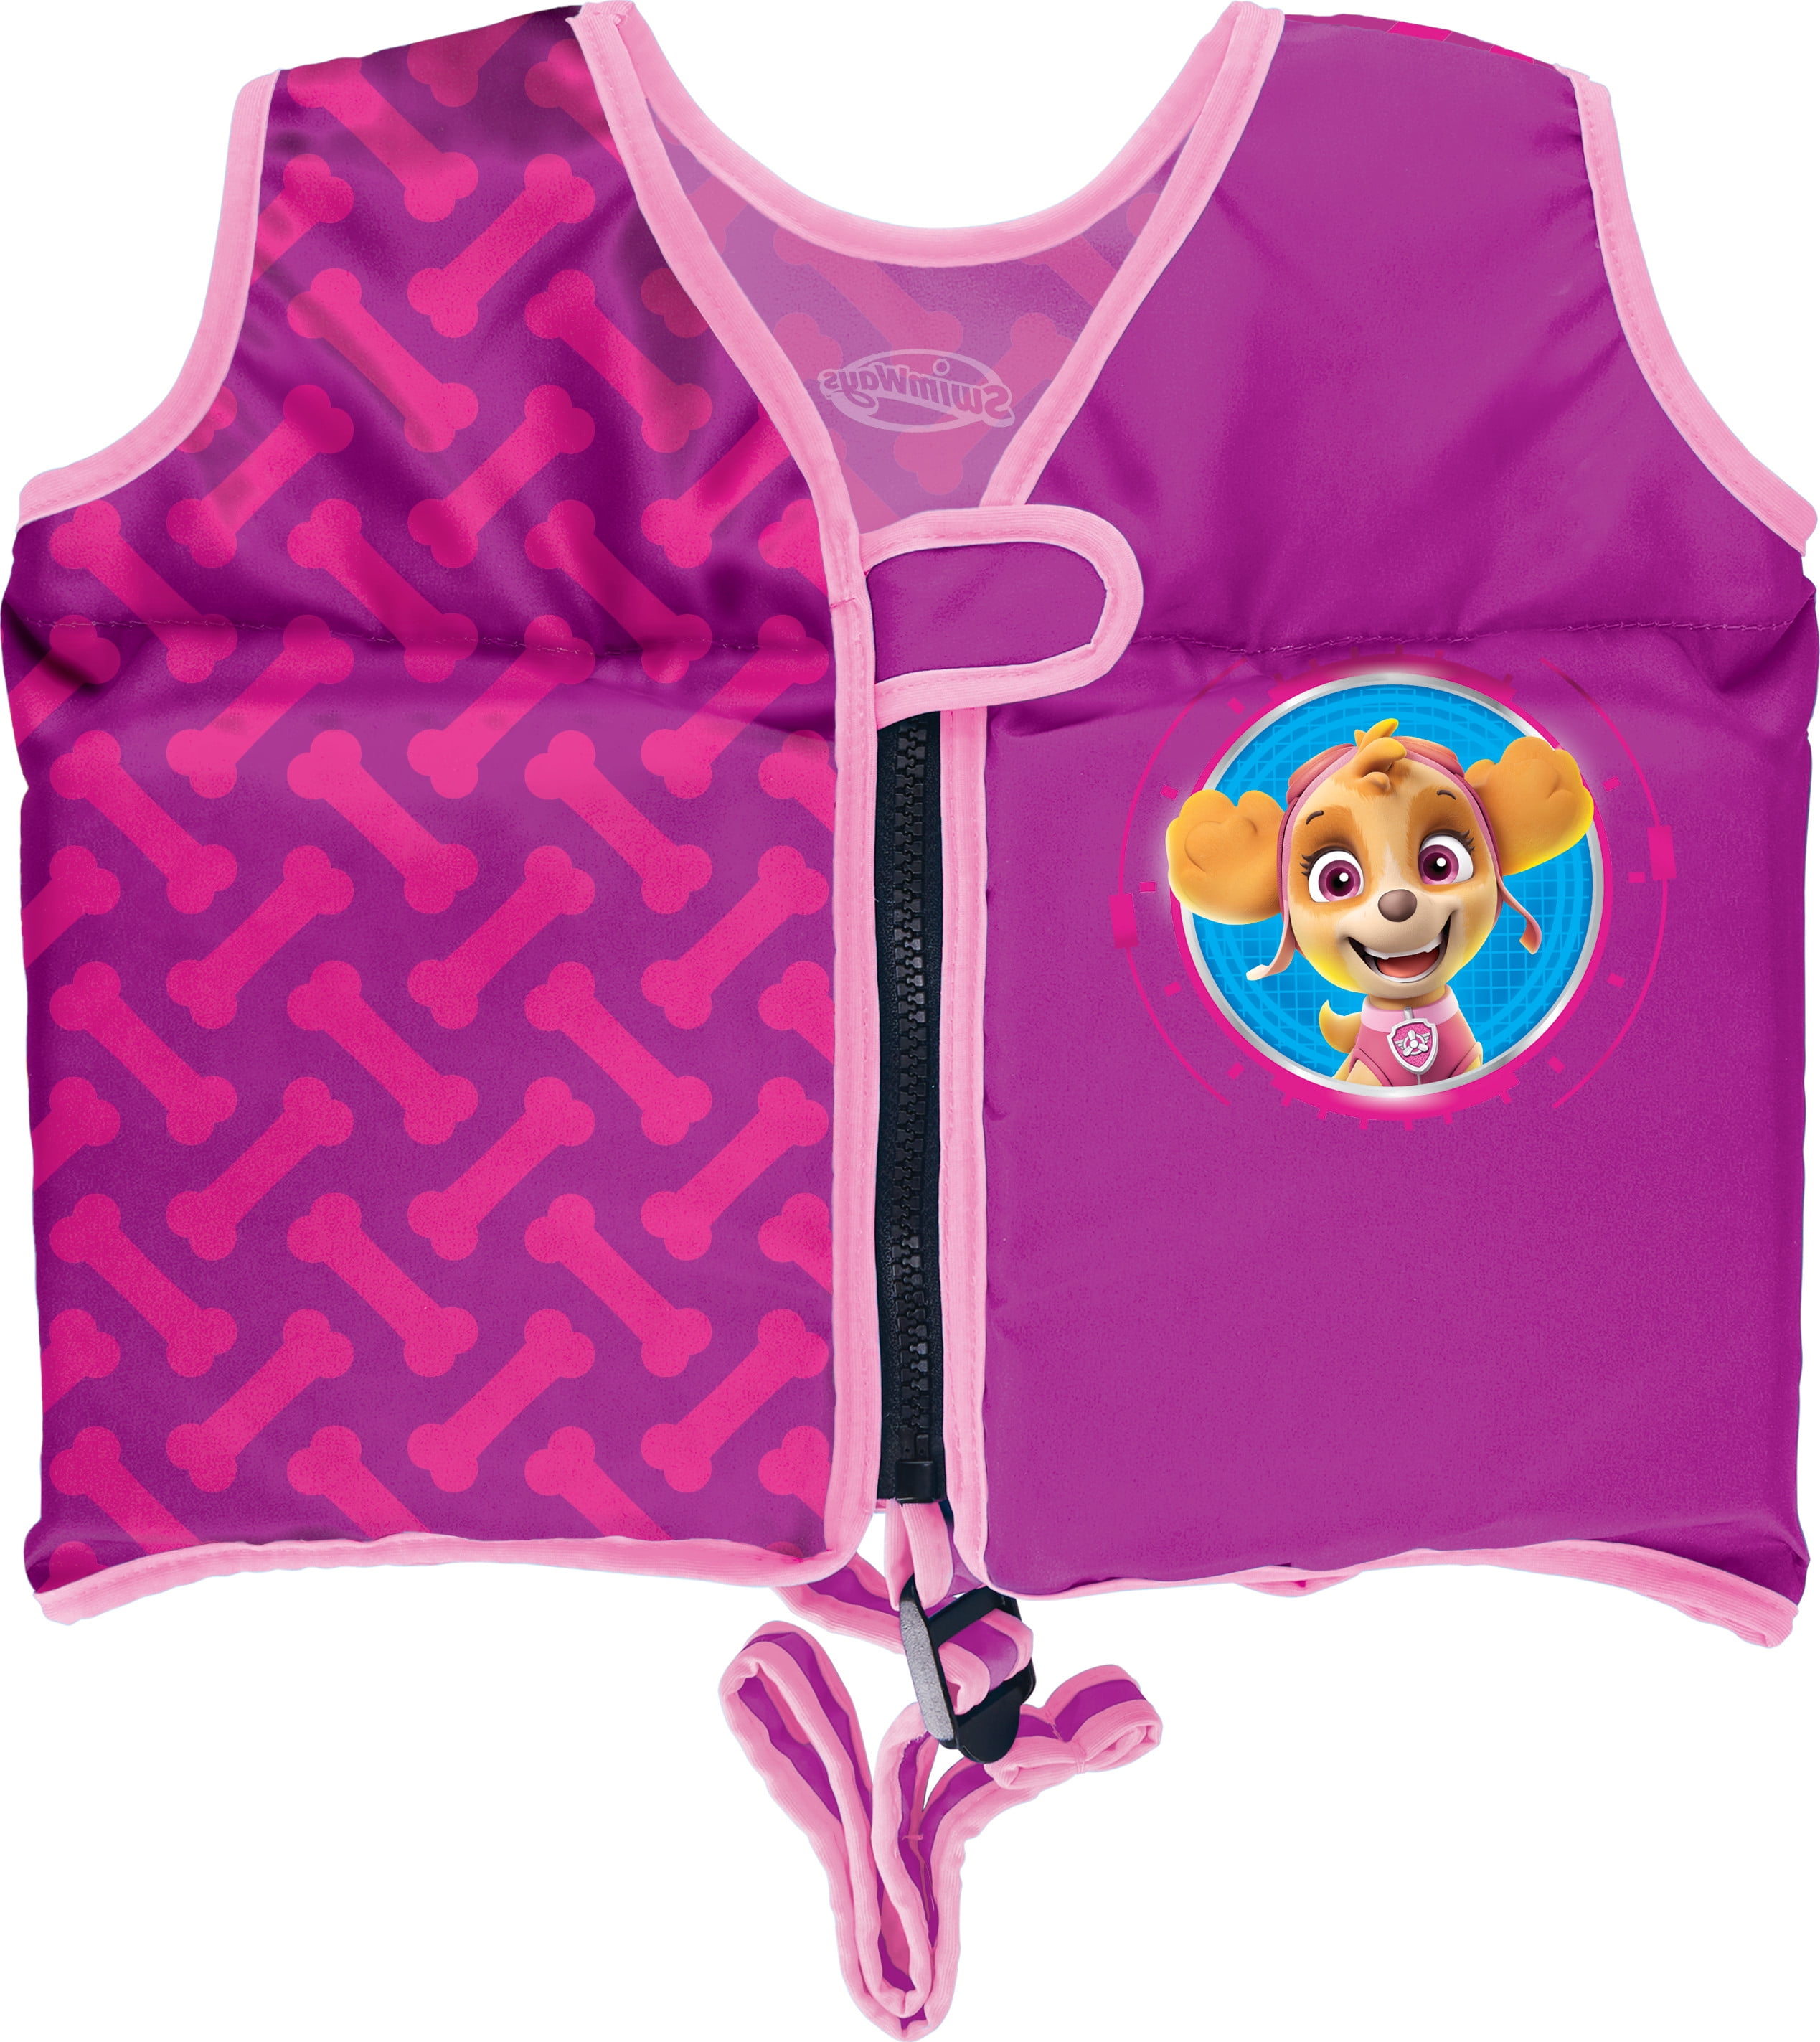 Nickelodeon Paw Patrol Life Jacket for Child 30 to 50 LB S for sale online 